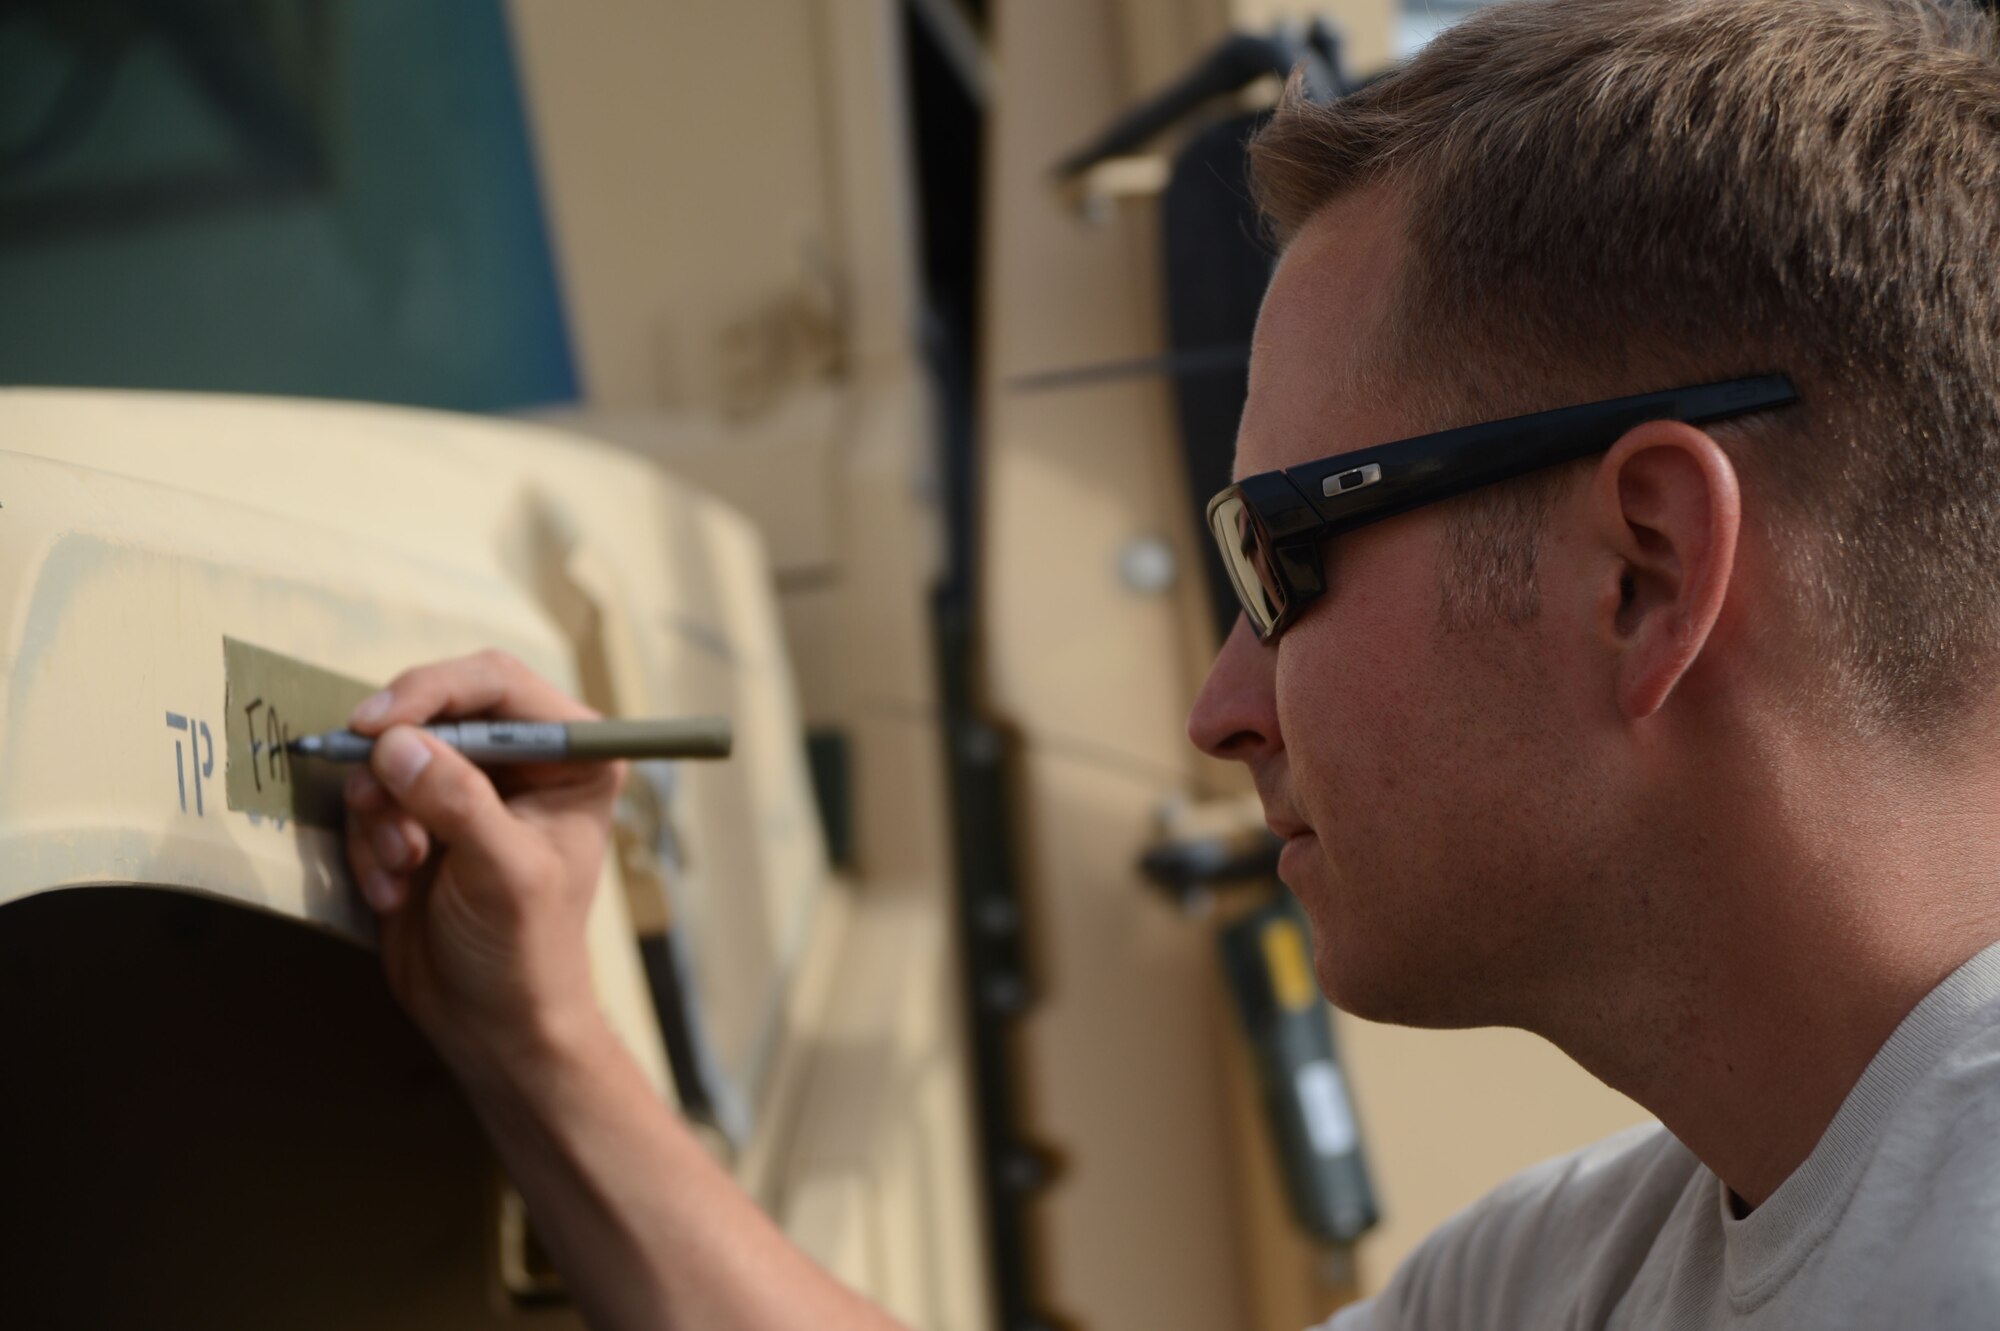 U.S. Air Force Staff Sgt. Michael Middleton, a cargo processor assigned to the 455th Expeditionary Aerial Port Squadron Detachment 1, writes the weight of front driver side axel of an up-armored Humvee during the inspection process of accepting vehicles for shipment Sept. 24 on the flight line of at Mazar-e Sharif, Afghanistan June 24, 2014. Middleton, a native of Bonney Lake, Wash., is deployed from the 732nd Air Mobility Squadron at Joint Base Elmendorf-Richardson, Alaska. (U.S. Air Force photo by Master Sgt. Cohen A. Young/Released)  